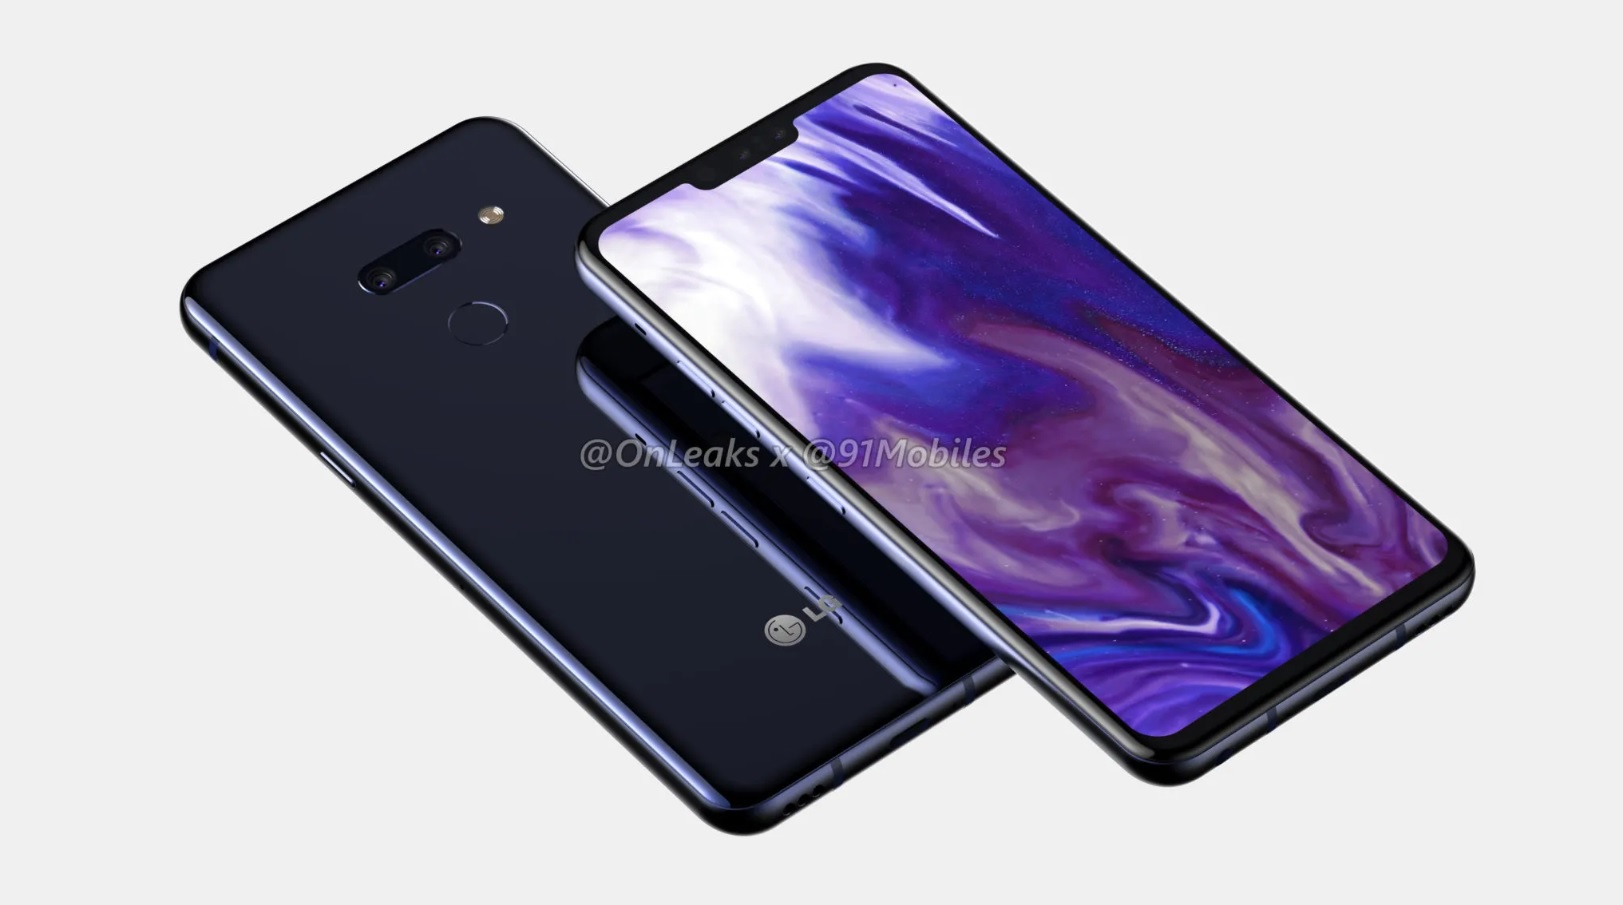 A professional render of the LG G8 ThinQ.